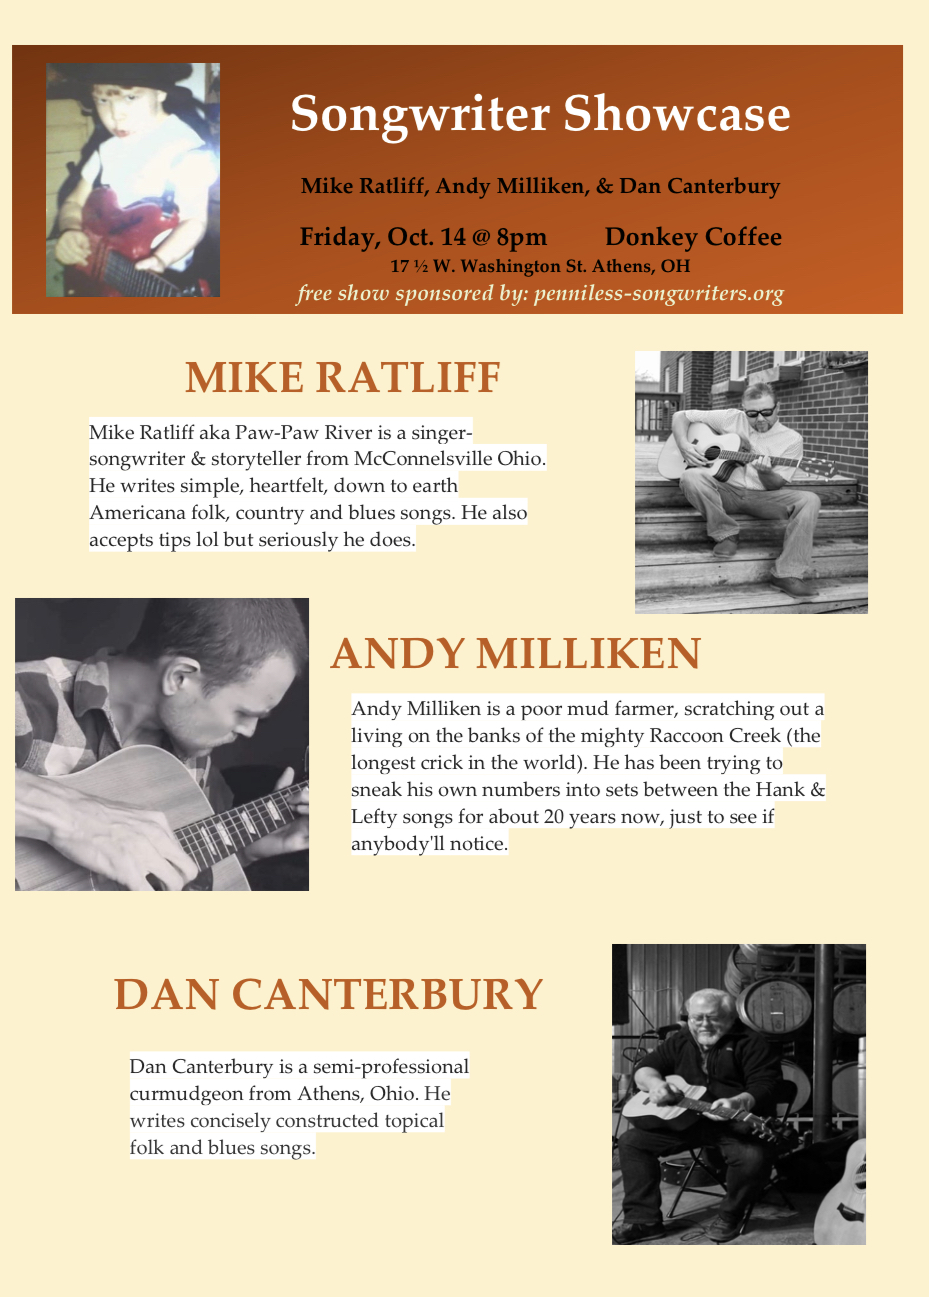 An iage reading: Songwriter Showcase at The Donkey. Mike Ratliff Andy Millikan and Dan Canterbury